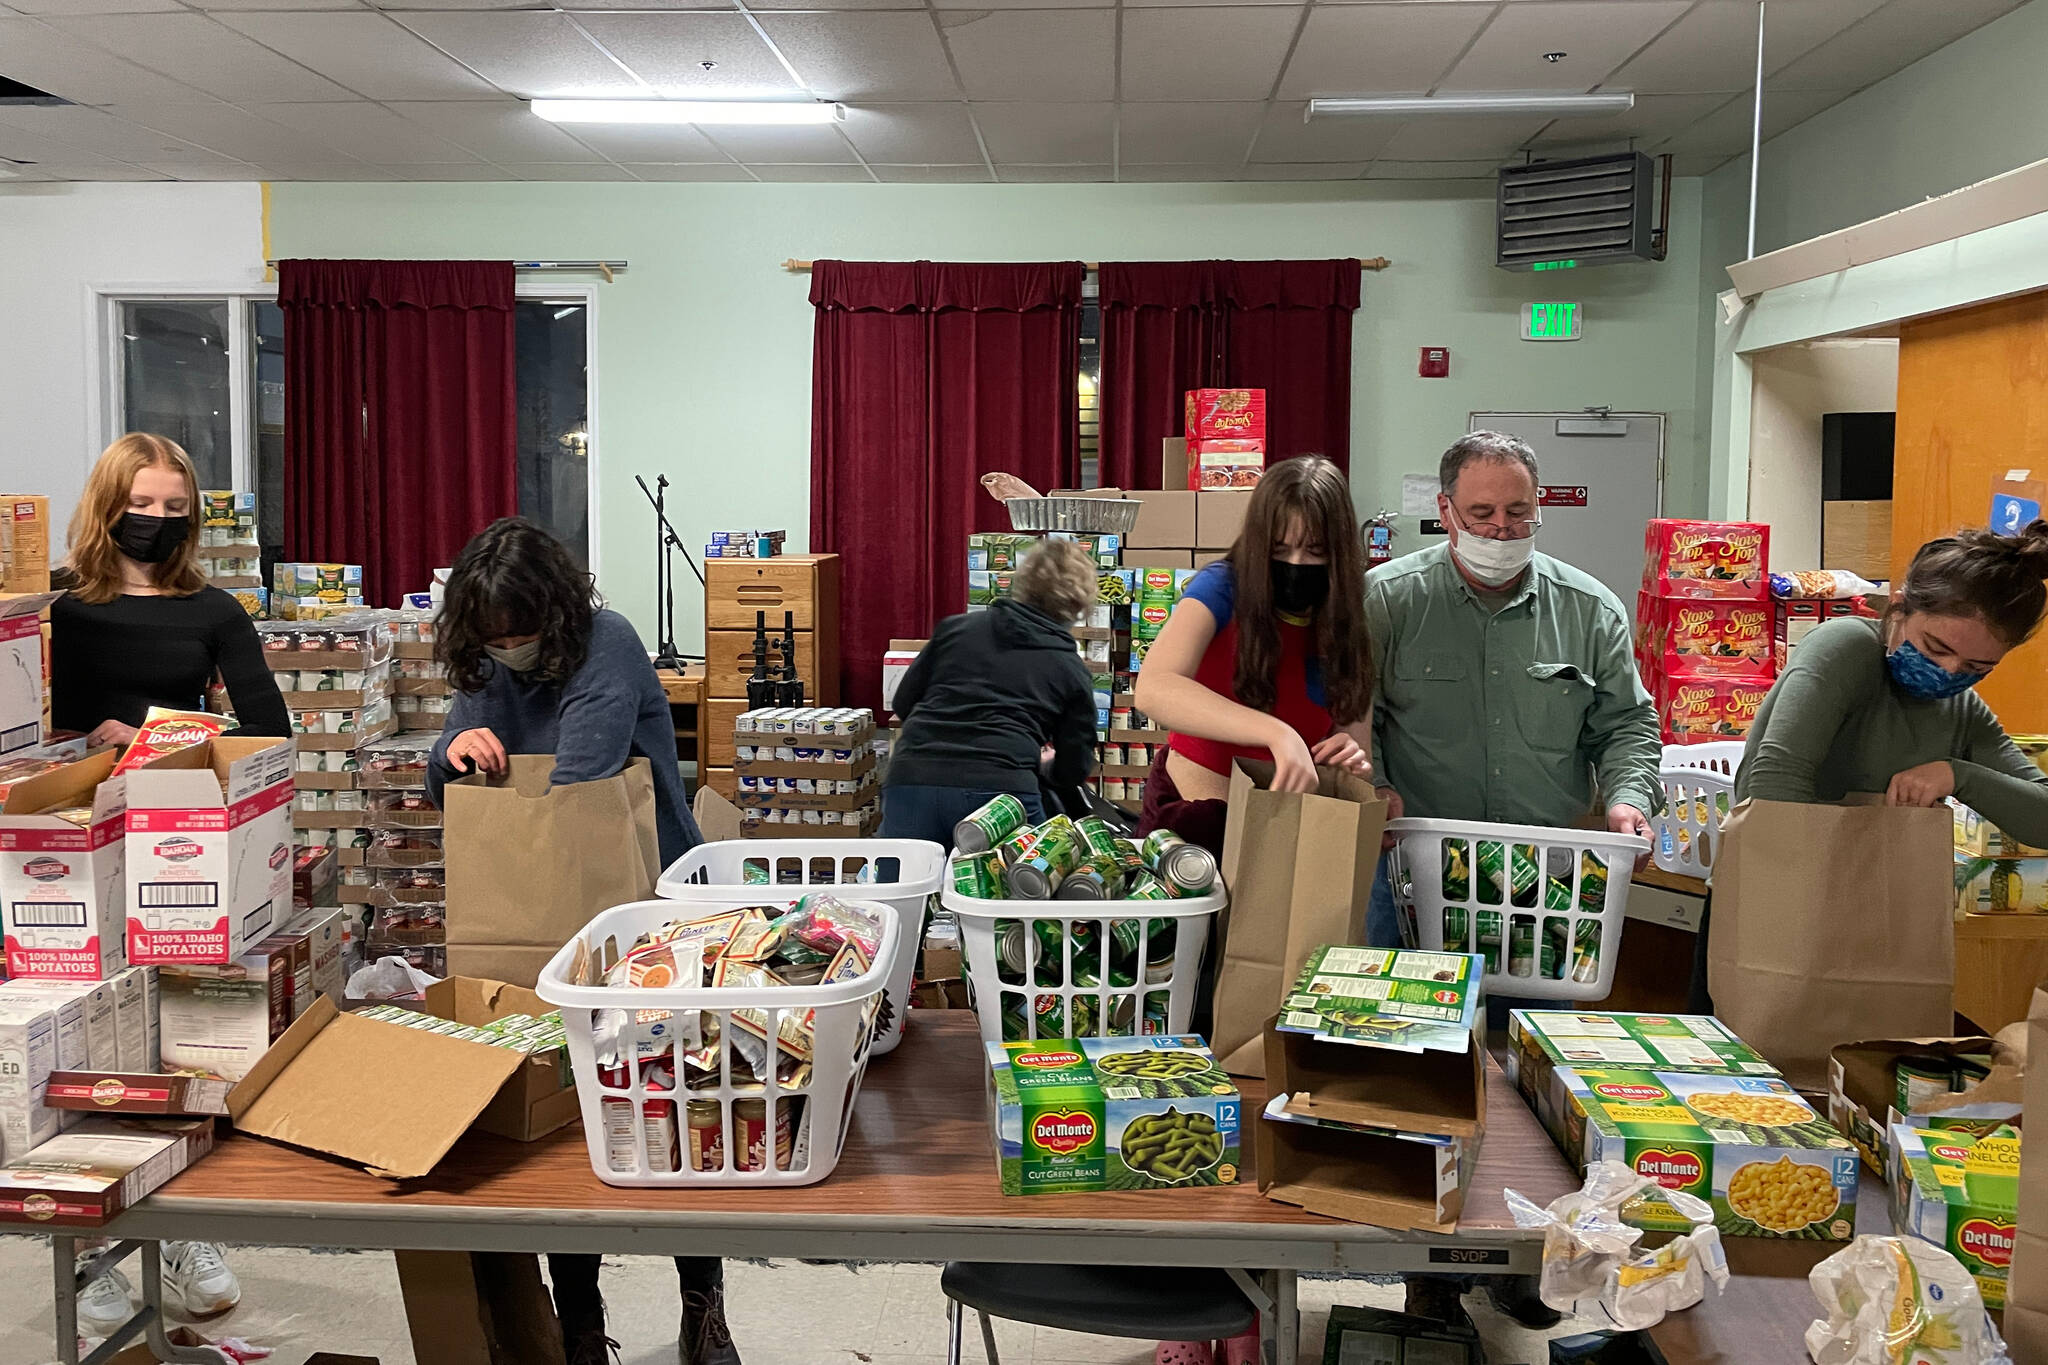 Volunteers from the Thunder Mountain High School Interact Club prepare Thanksgiving food baskets for the Juneau Society of St. Vincent de Paul on Nov. 18, 2021. (Michael S. Lockett / Juneau Empire)